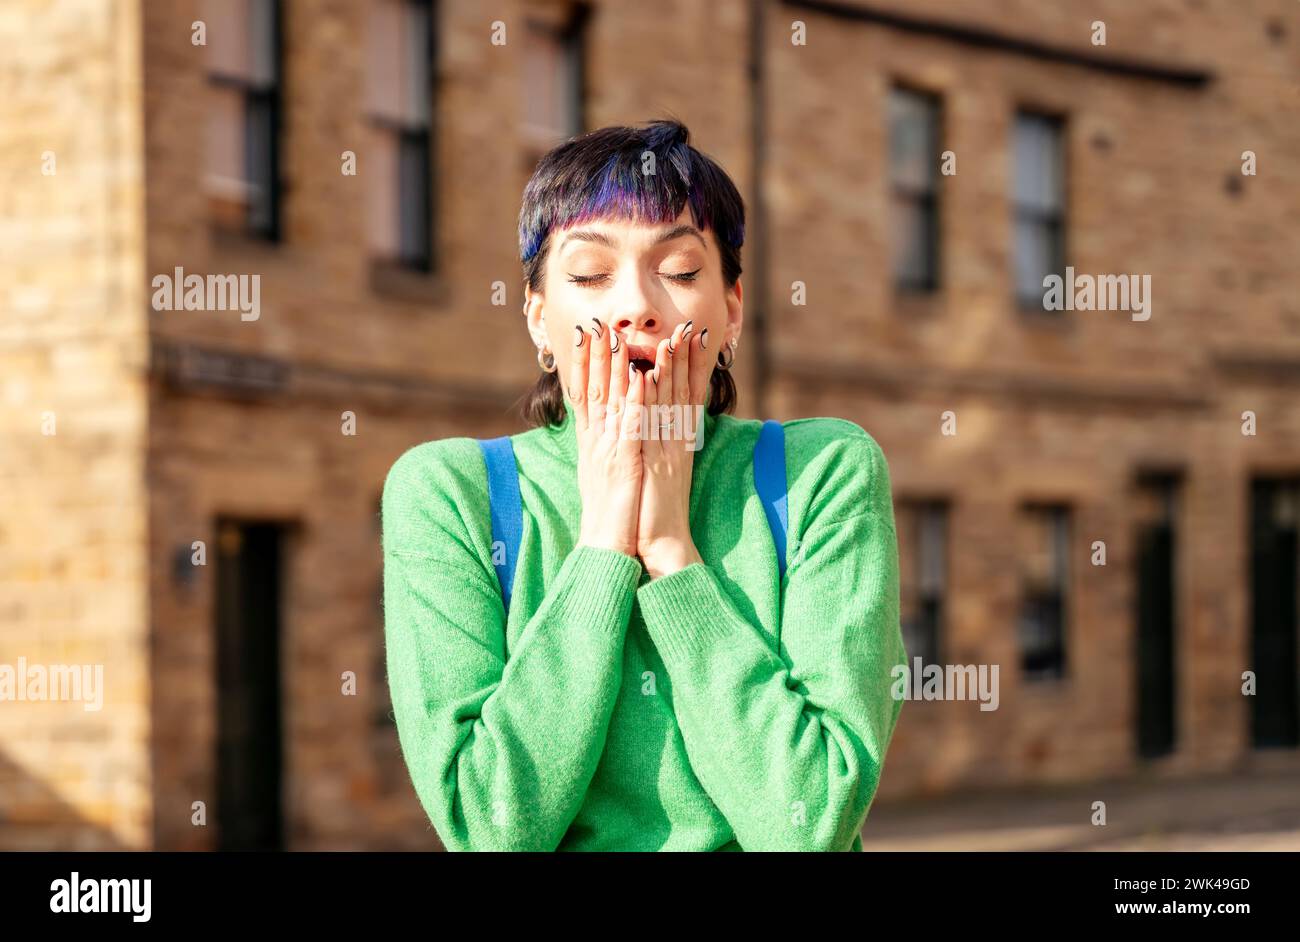 a woman in a green shirt shocked from news.  Holding hands on her mouth. Standing alone outside. Old buildings behind. Stock Photo